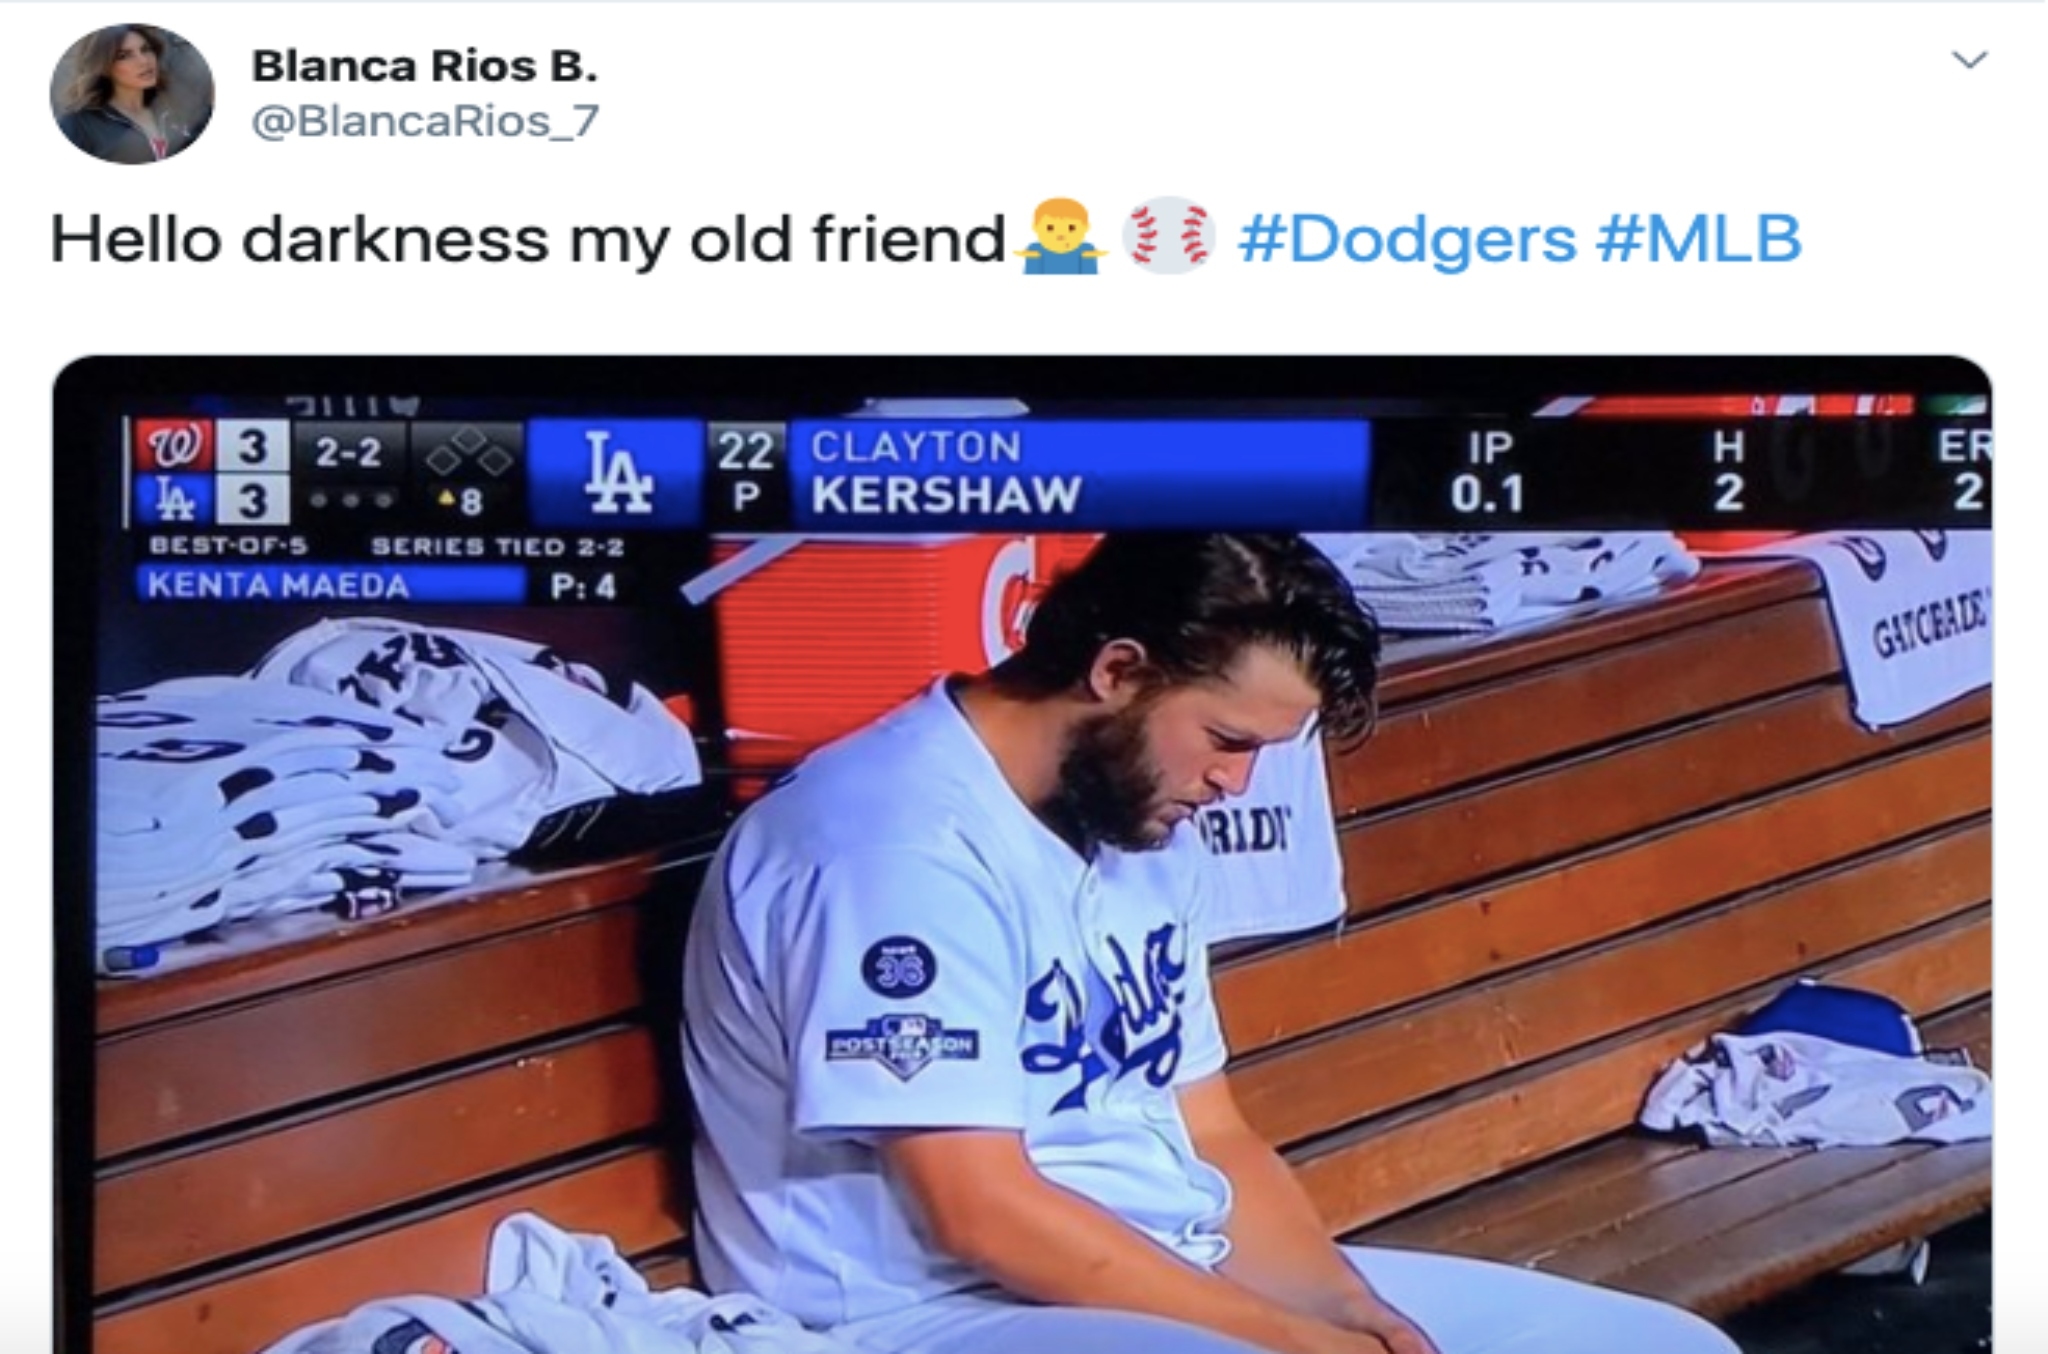 Giants fans mock Dodgers after yet another October collapse